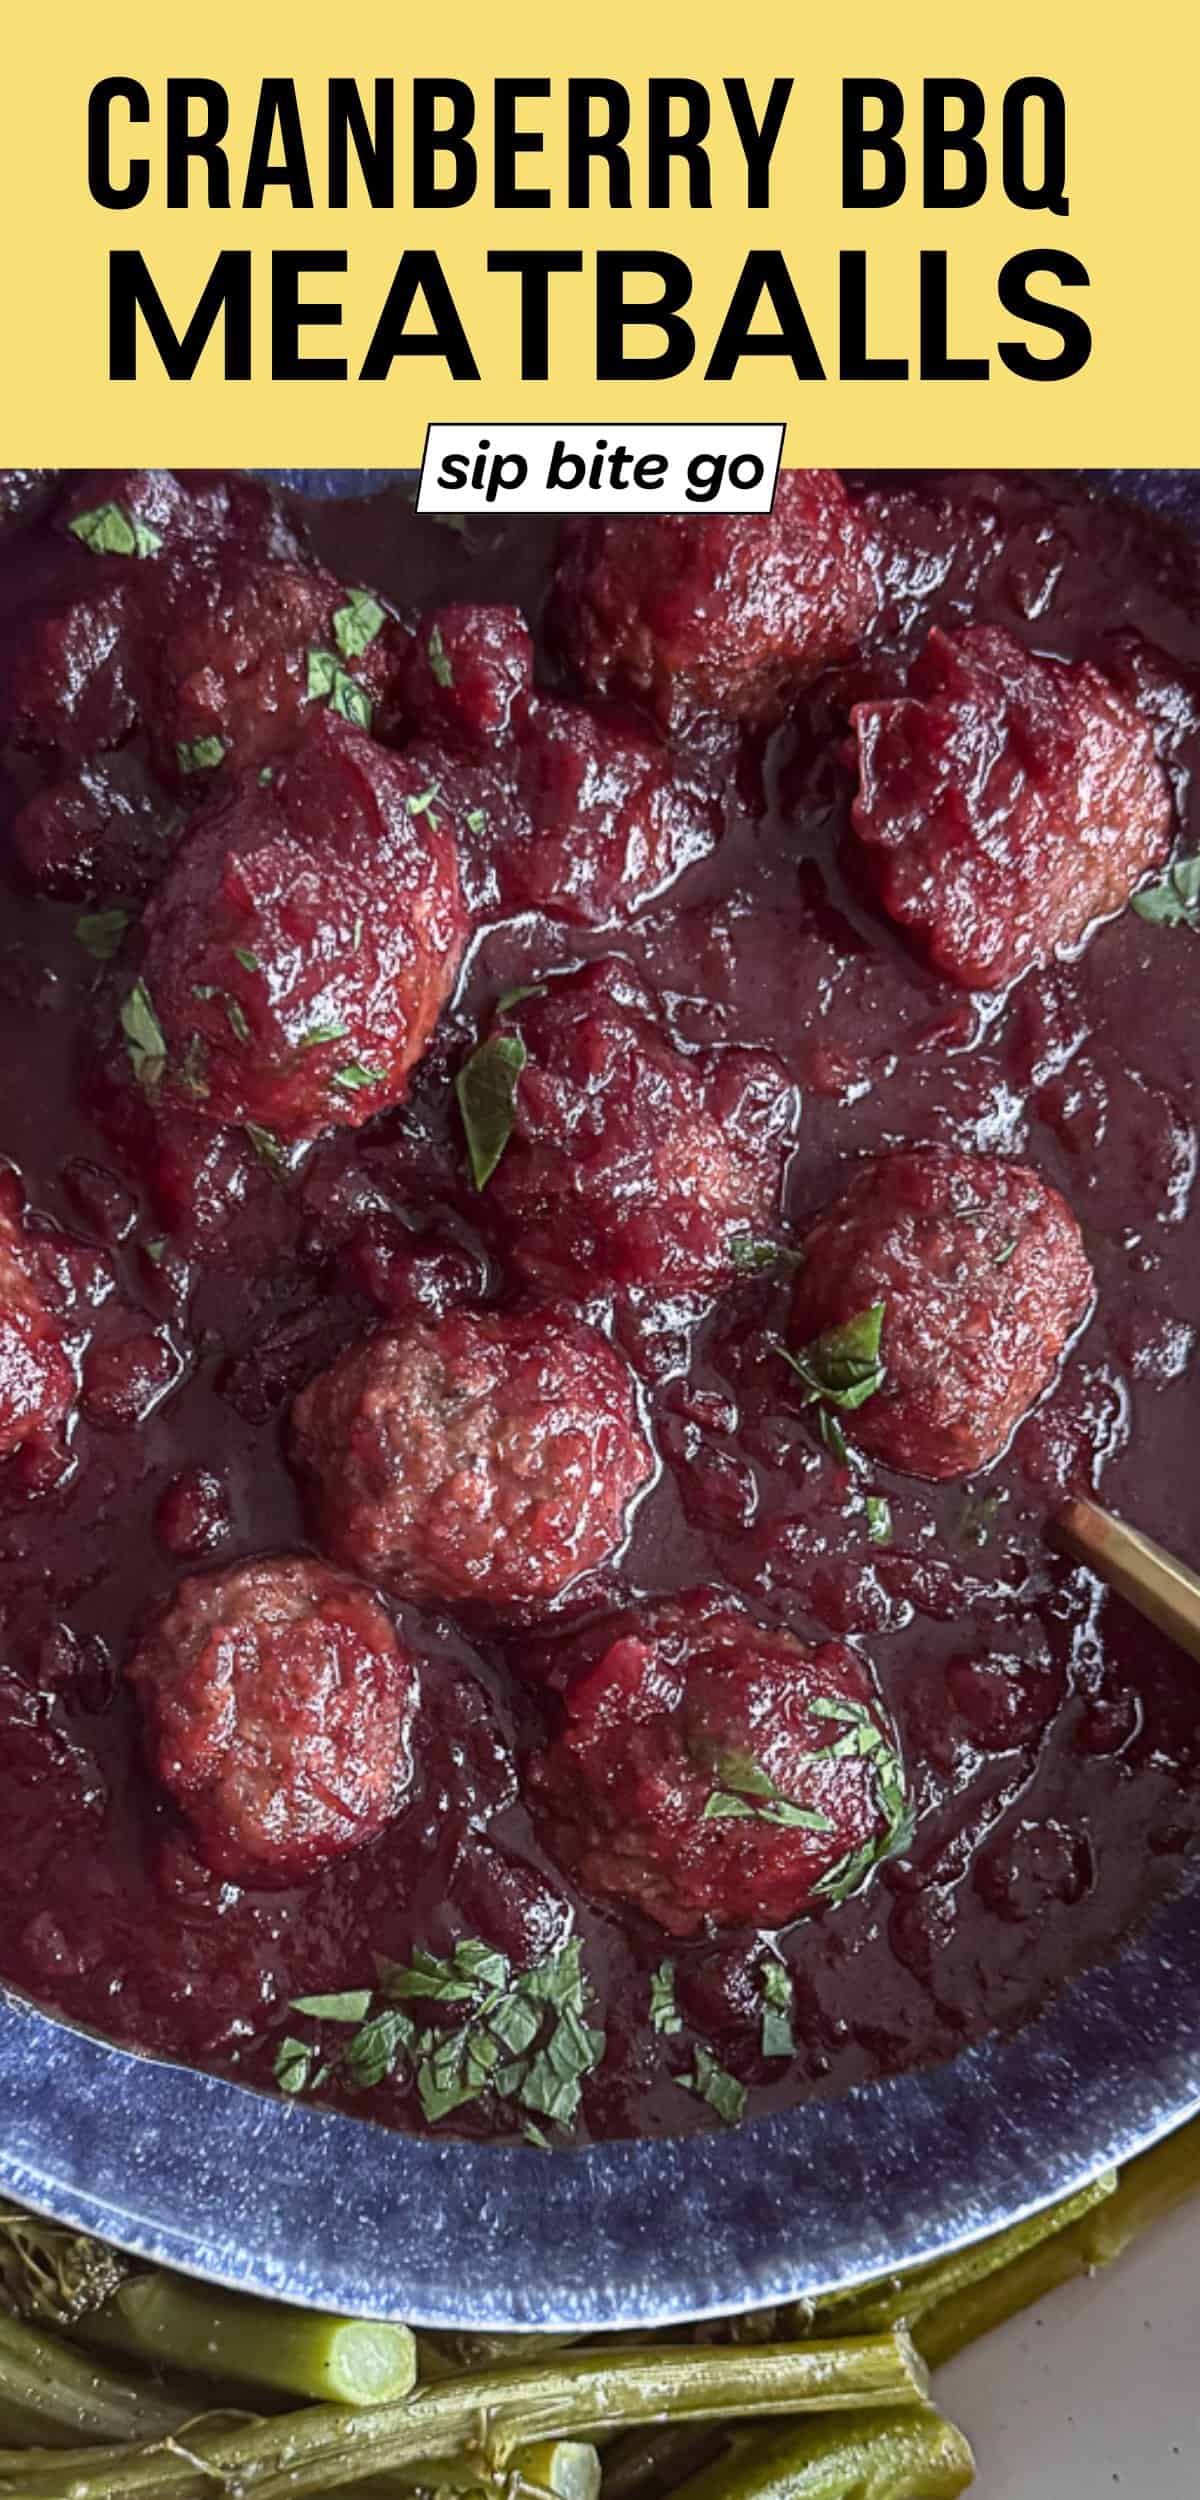 Cranberry BBQ Meatballs recipe with text overlay